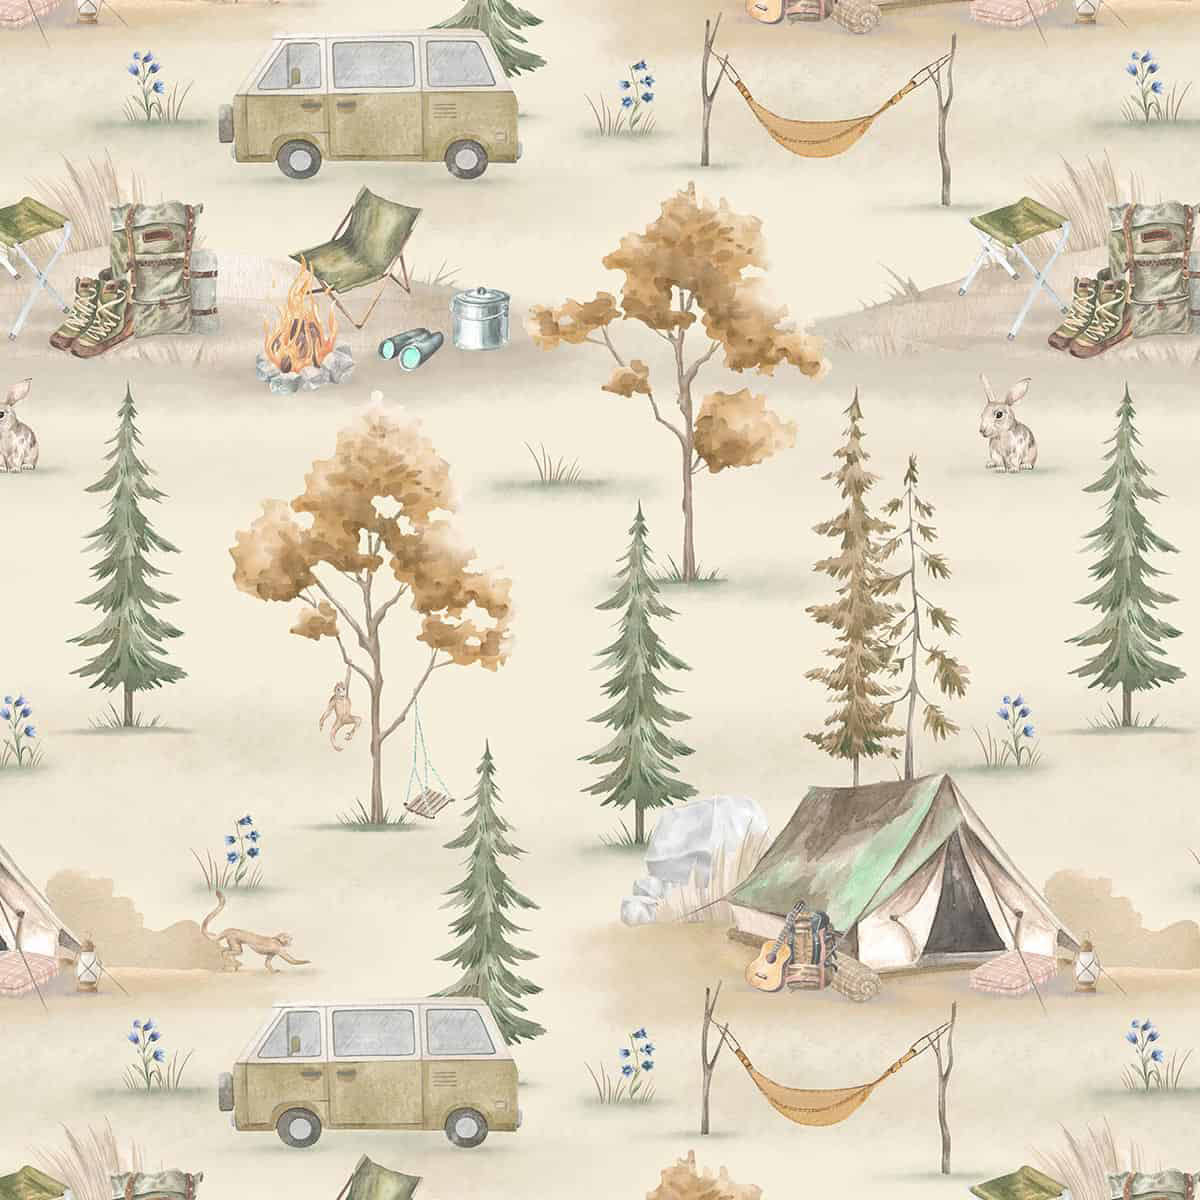 Wildlife Campout in the Jungle, Design for Kids, Autumn